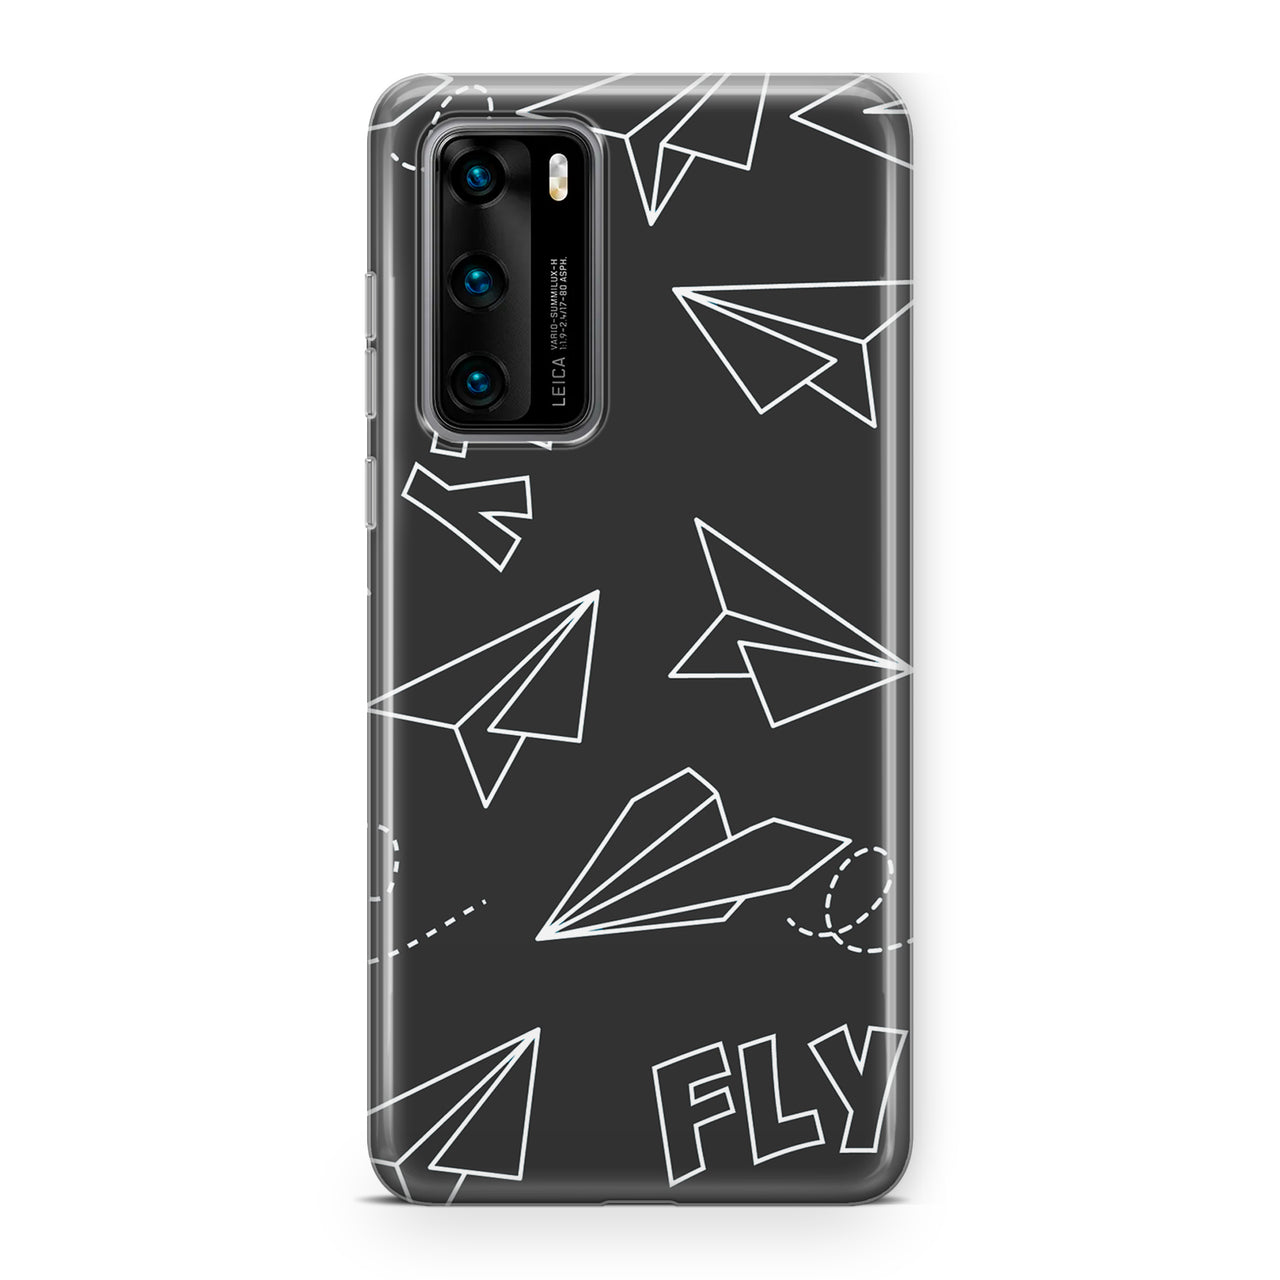 Paper Airplane & Fly-Gray Designed Huawei Cases